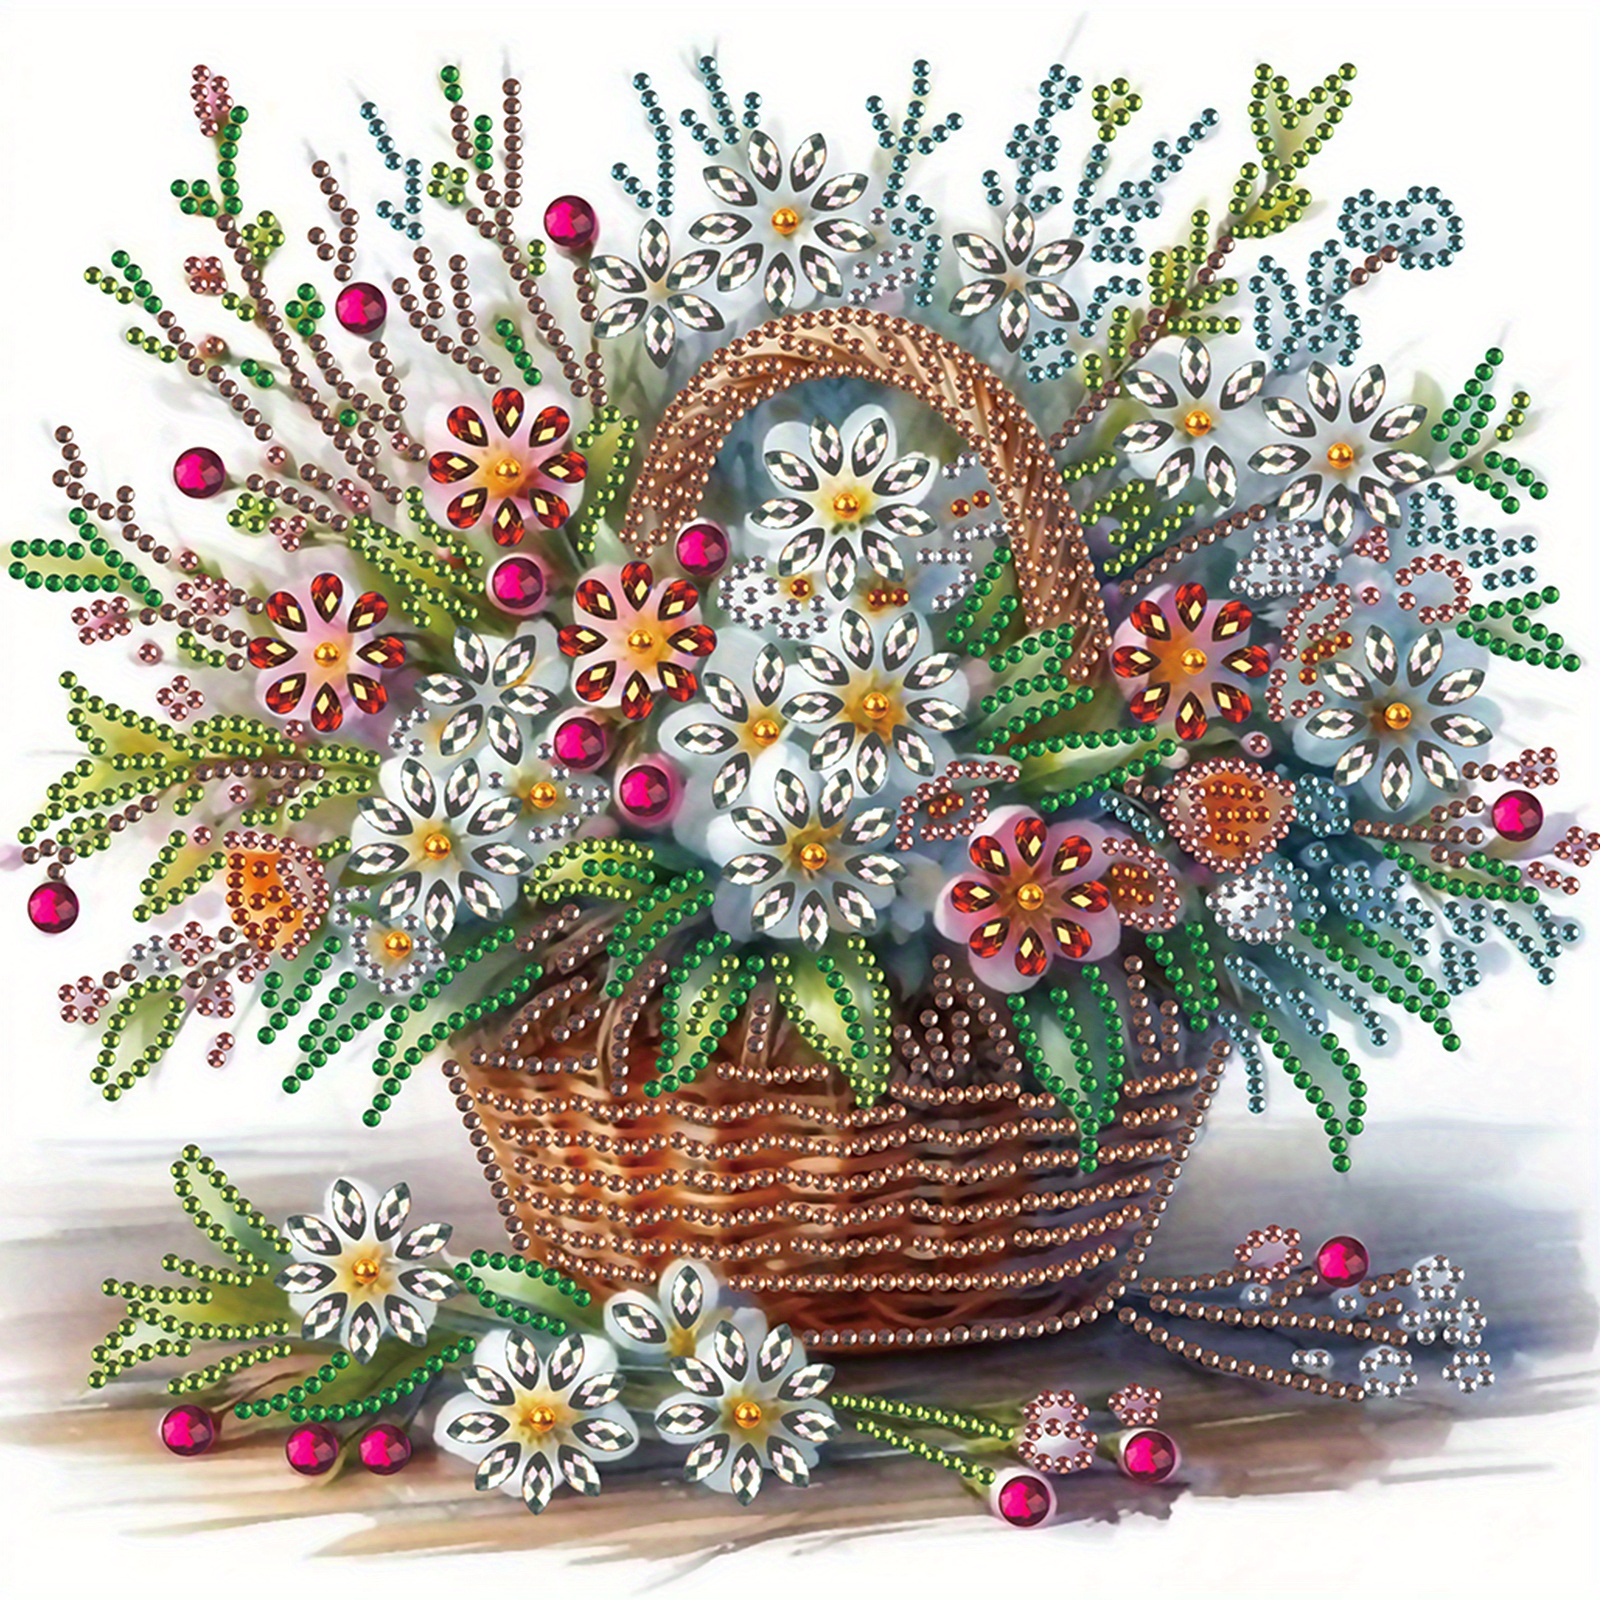 

Flower Basket 5d Diamond Painting Kit - Special Shaped Crystal Rhinestones, Beginner-friendly Art Set For Adults, Home Wall Decor Gift, 12x12 Inches